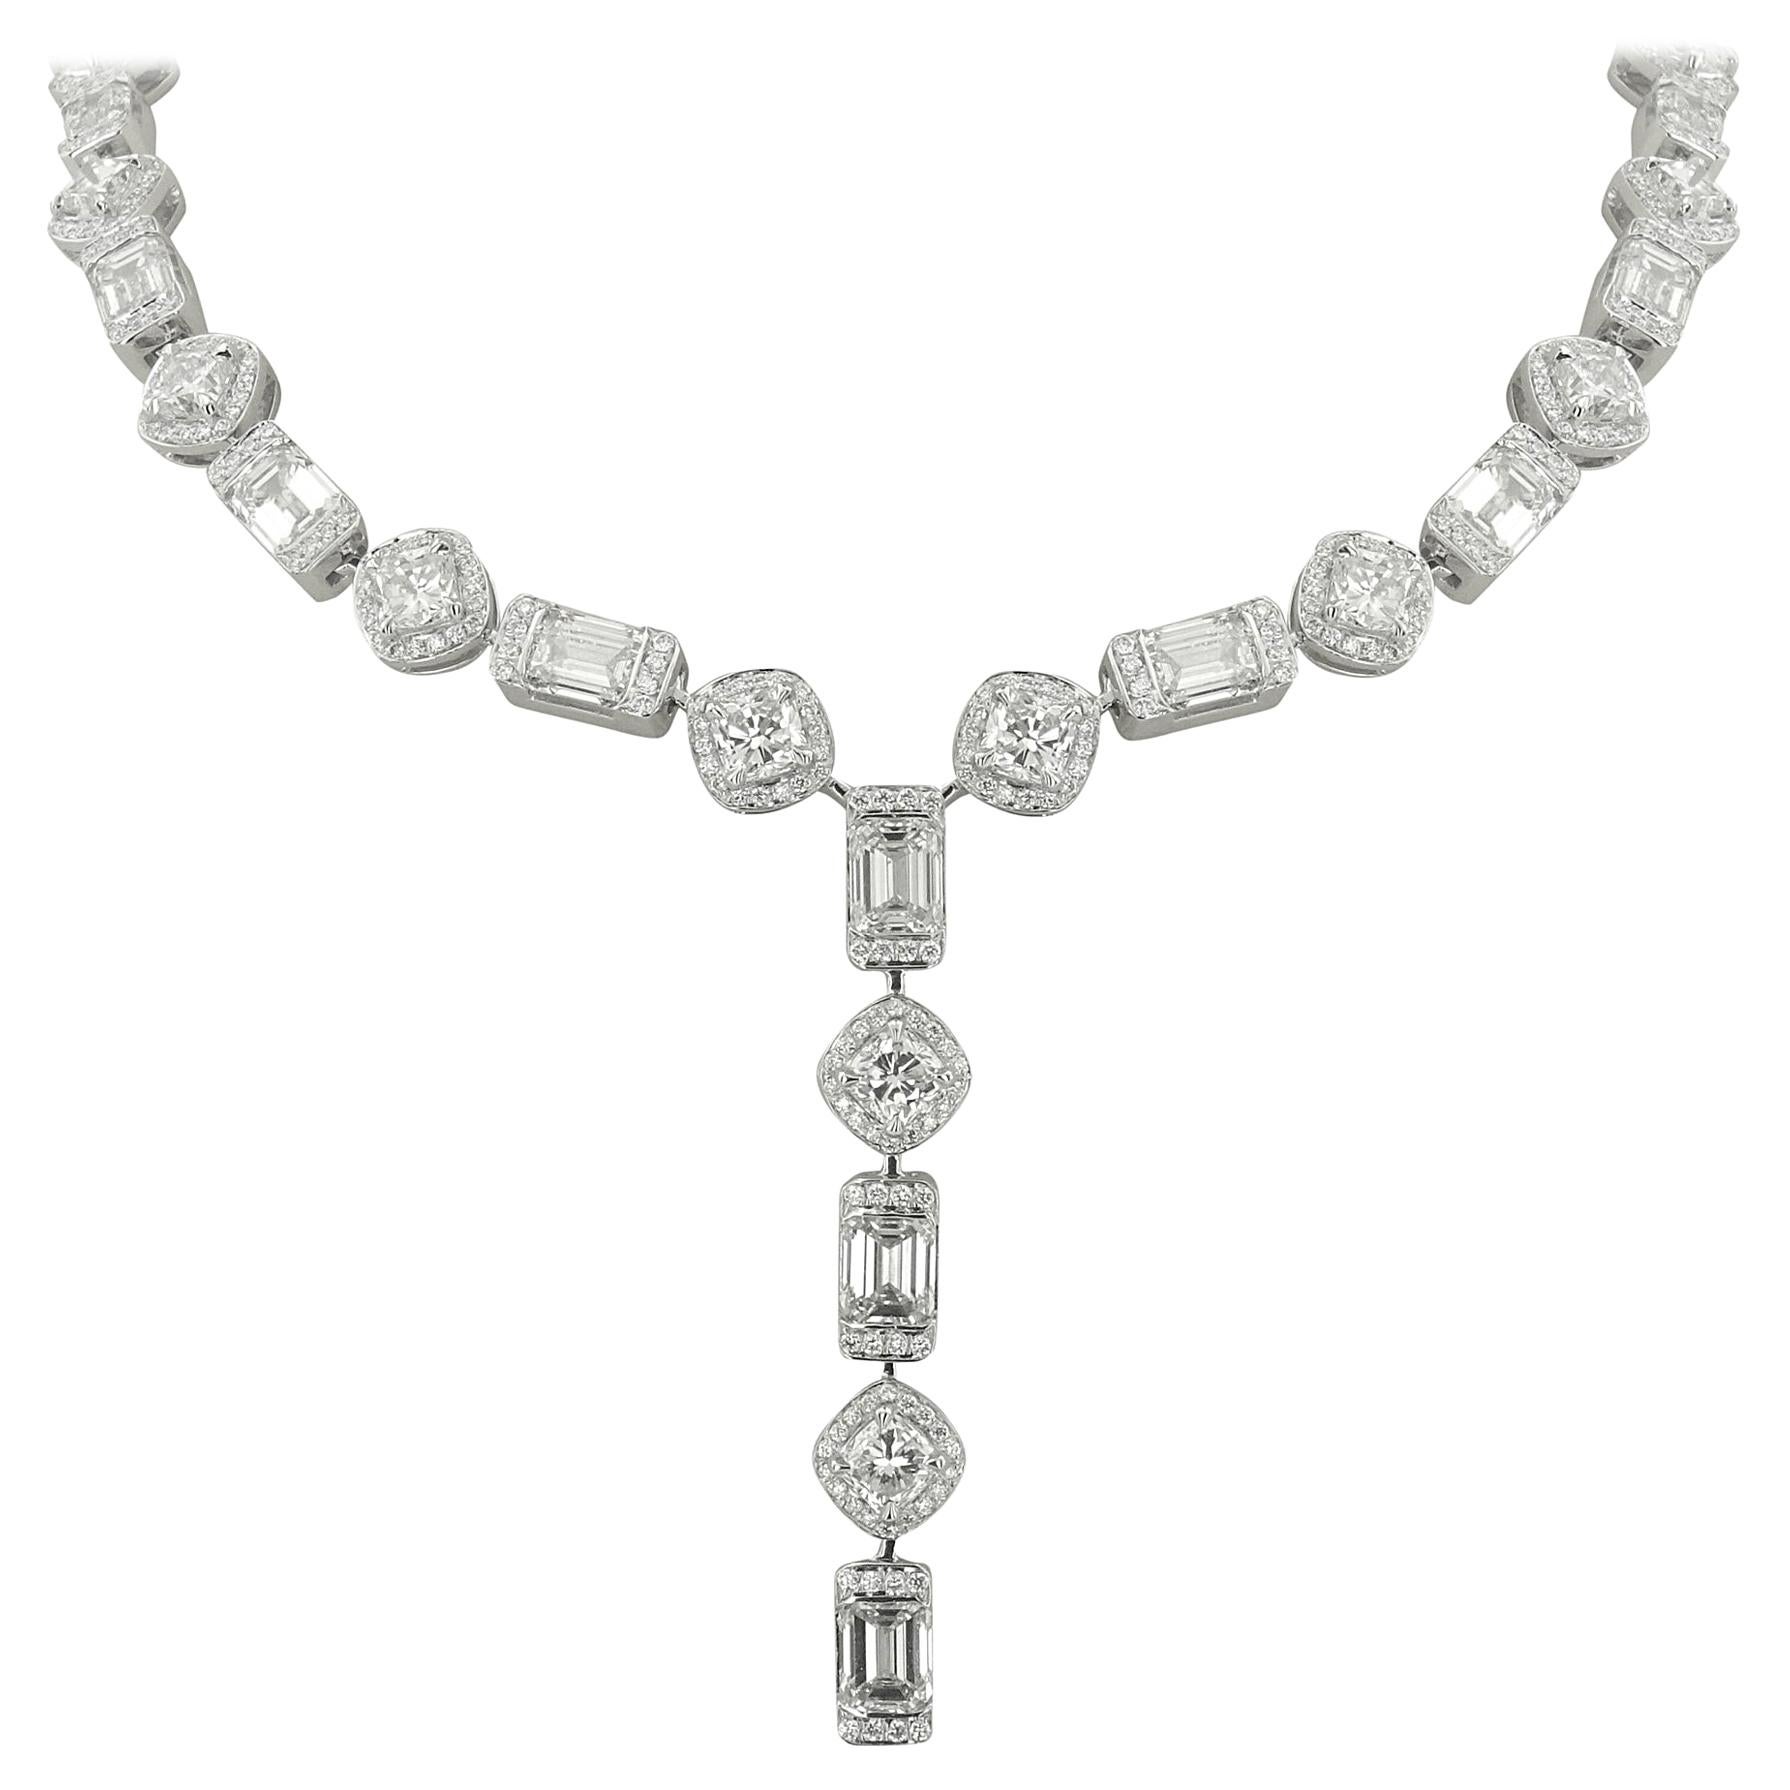 HRD and GIA Certified White Gold Diamond Necklace - 24.09 ct For Sale